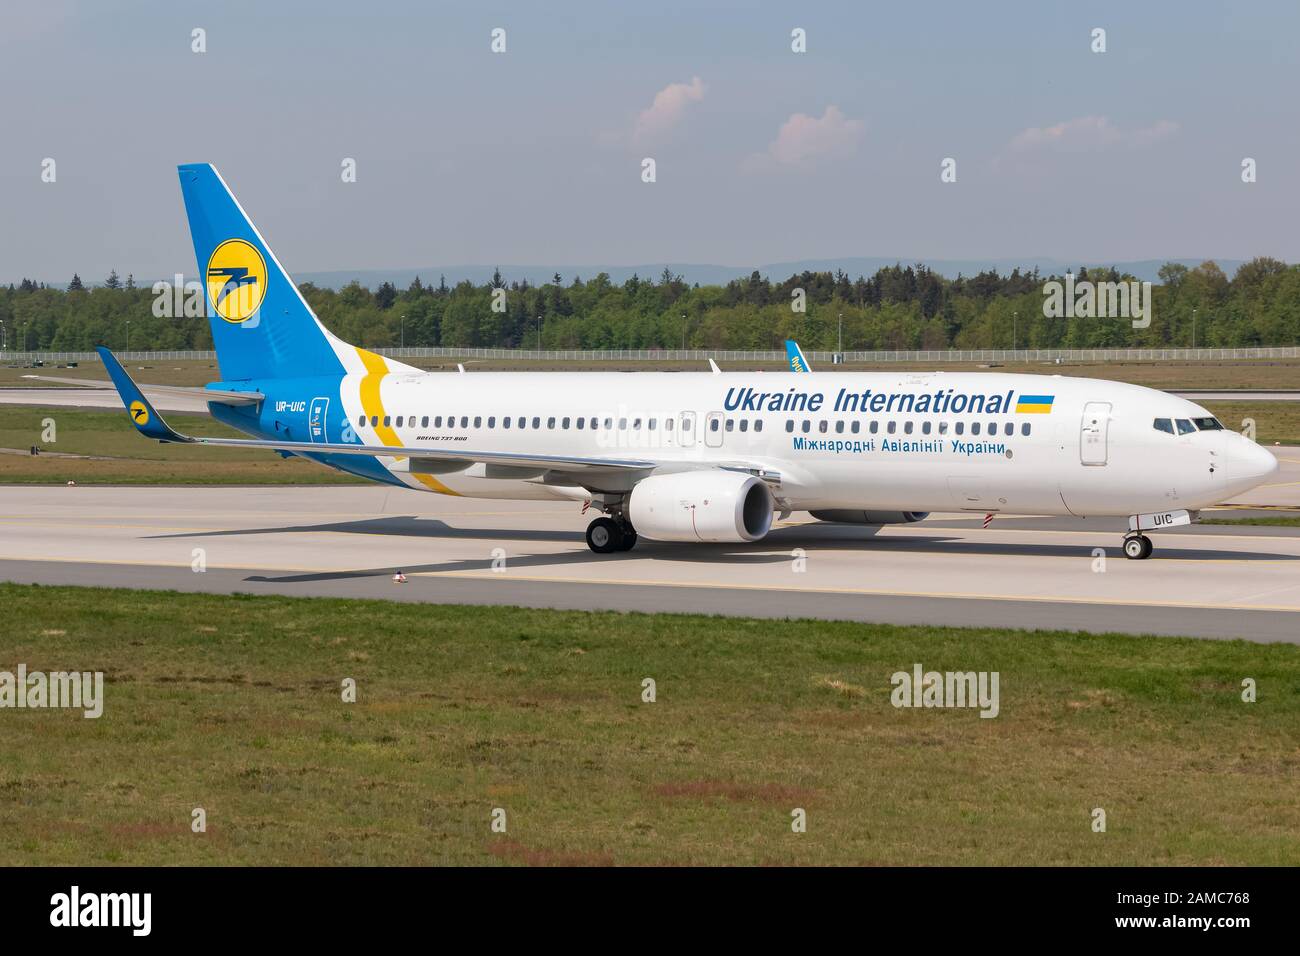 Frankfurt, Germany - April 22, 2018: Ukraine International Boeing 737 airplane at Frankfurt airport (FRA) in the Germany. Boeing is an aircraft manufa Stock Photo